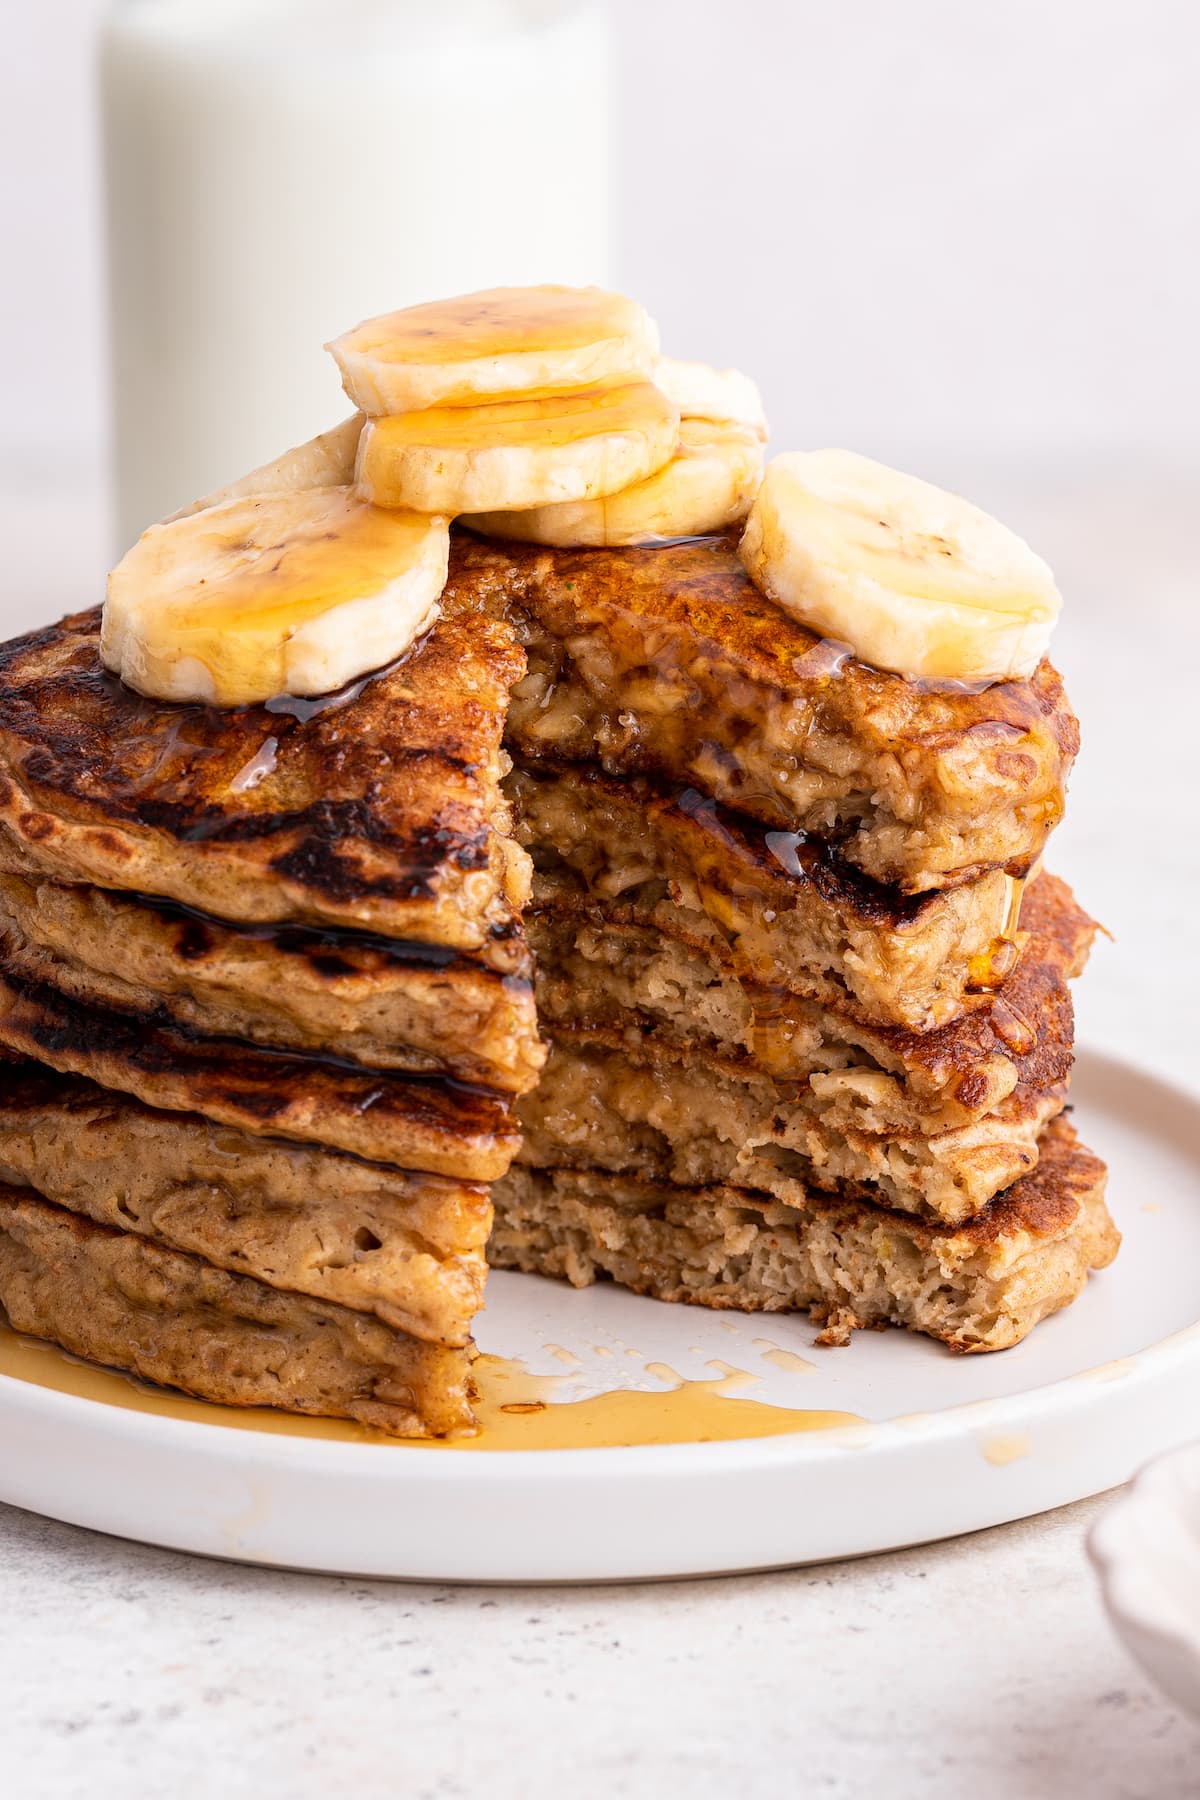 Five overnight oatmeal pancakes stacked on one another on a small plate with slices of banana and maple syrup. The stack of pancakes has a large triangular piece missing.